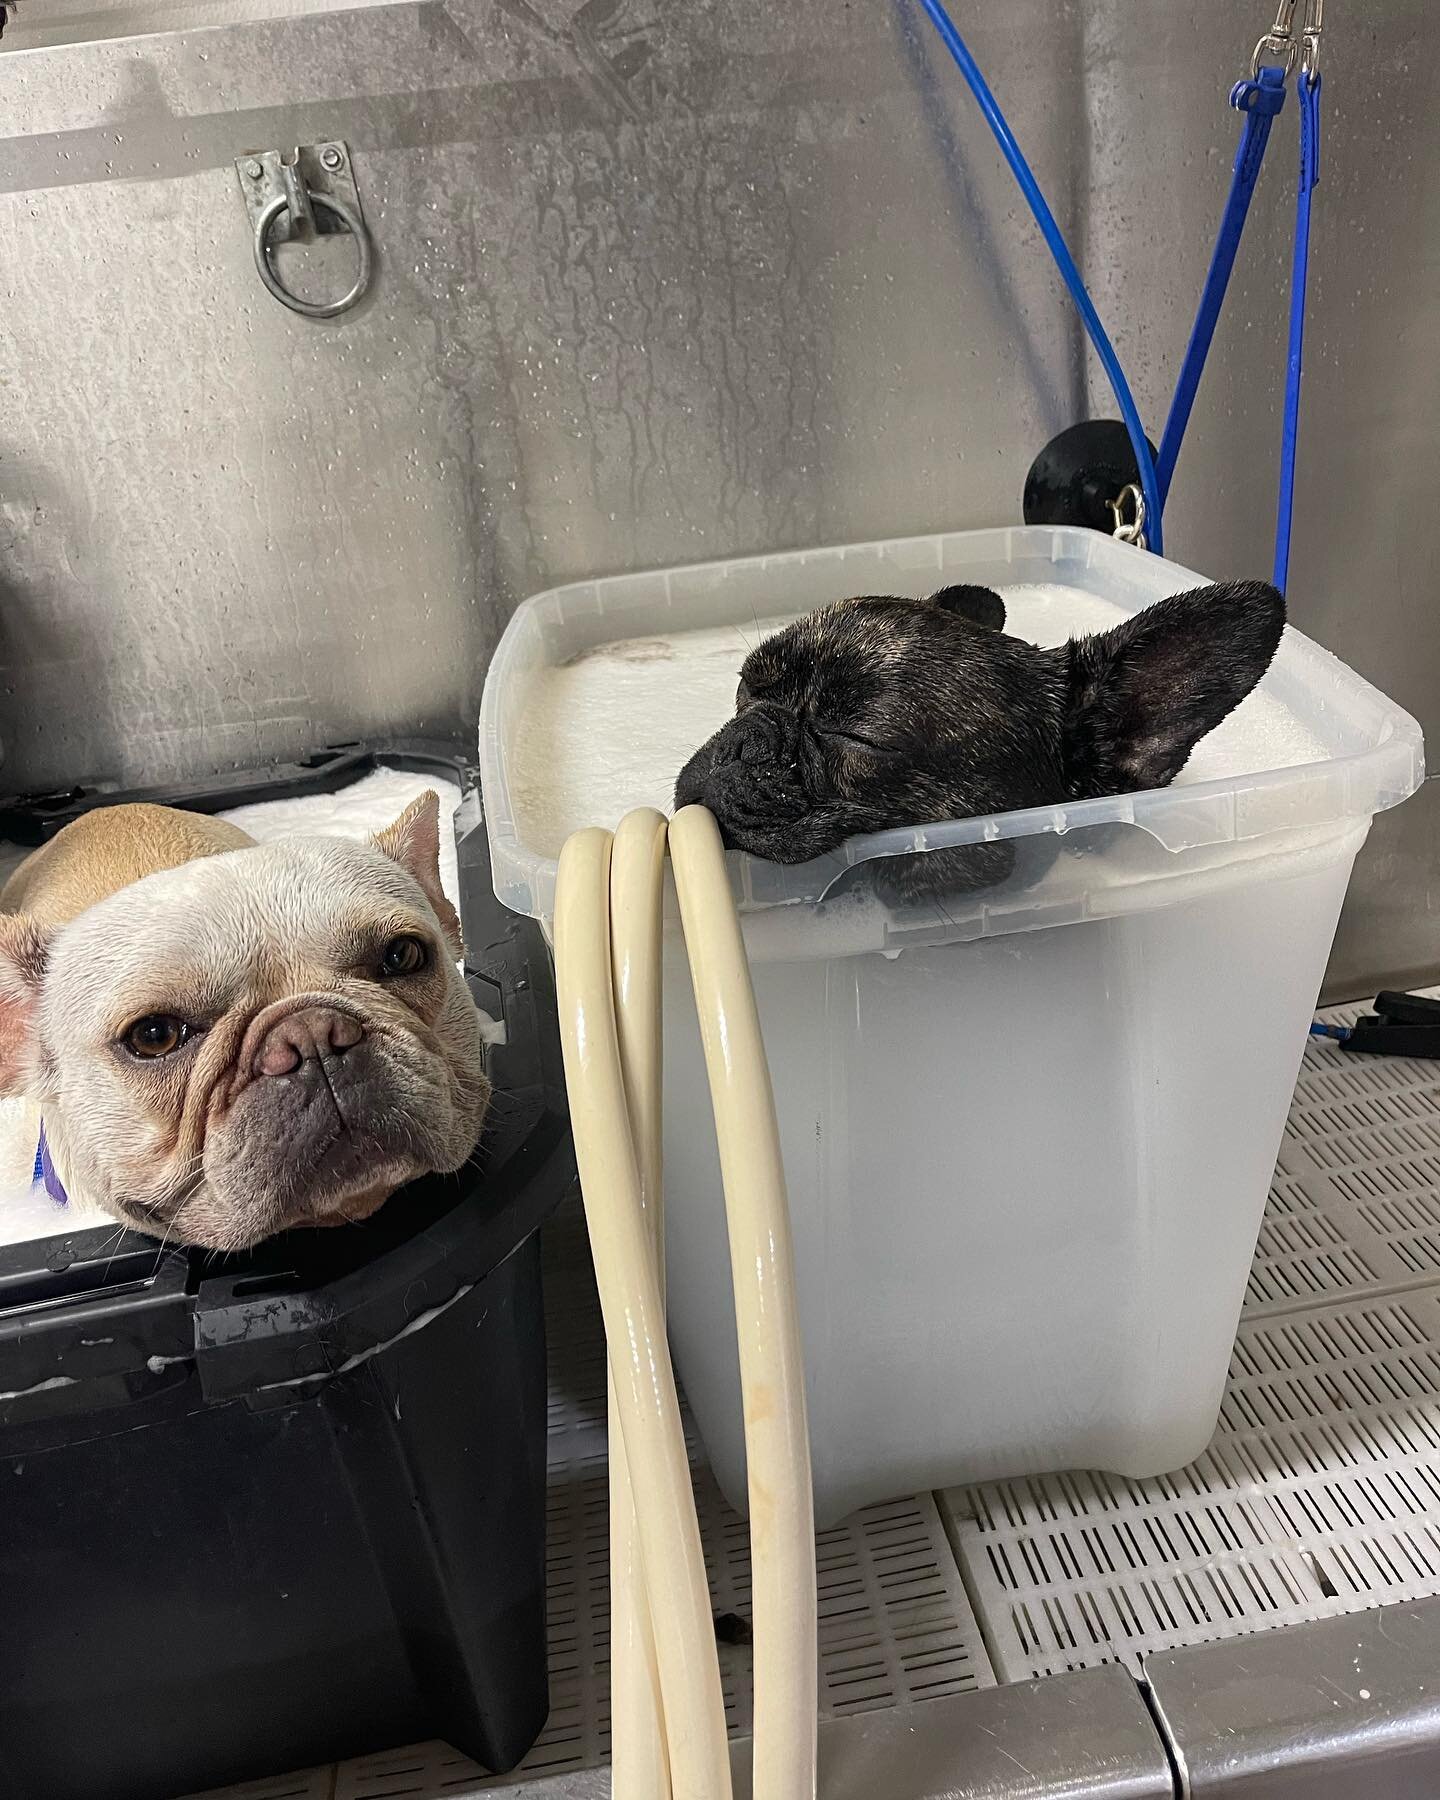 OMG Walter is just loving him TheraClean bath today #fabfurbtown #theracleanbath #theracleanmicrobubbles #frenchie #frechiesofinstagram